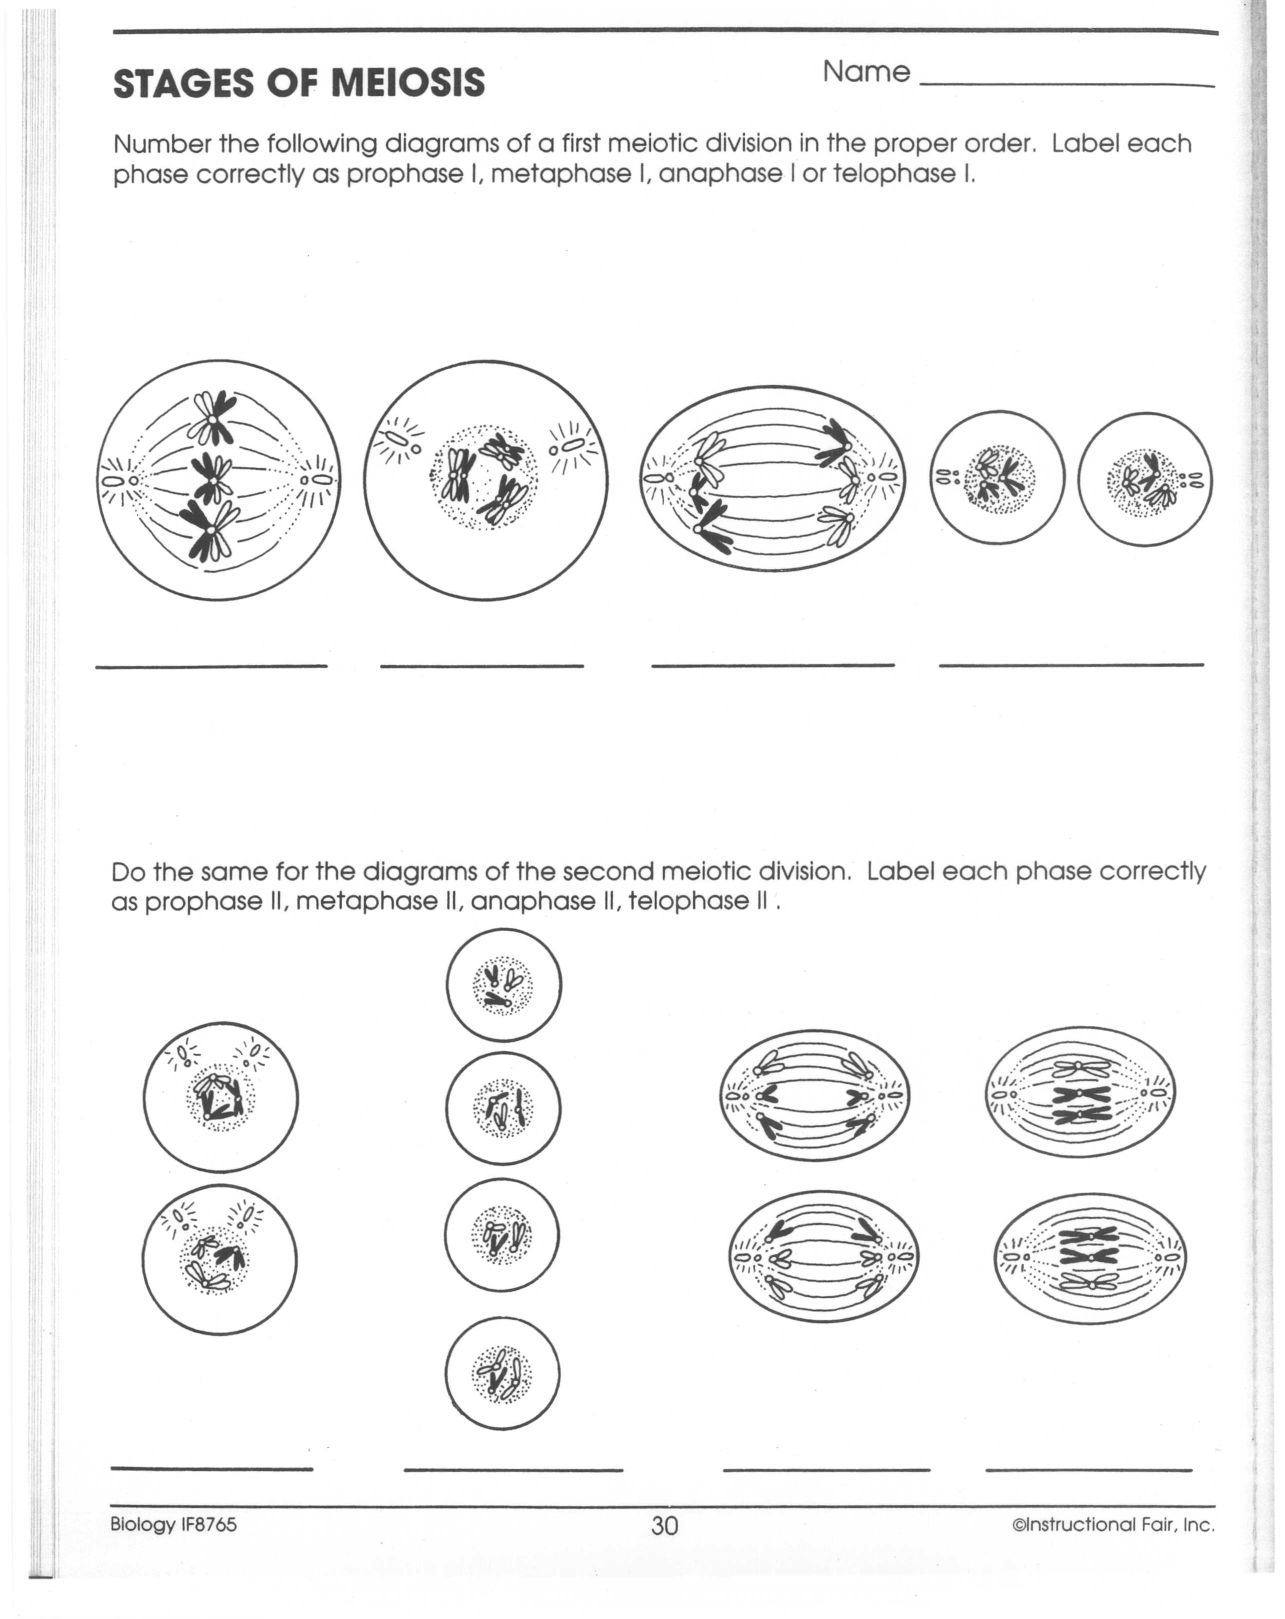 15 Best Images of Meiosis Stages Worksheet Answers ...